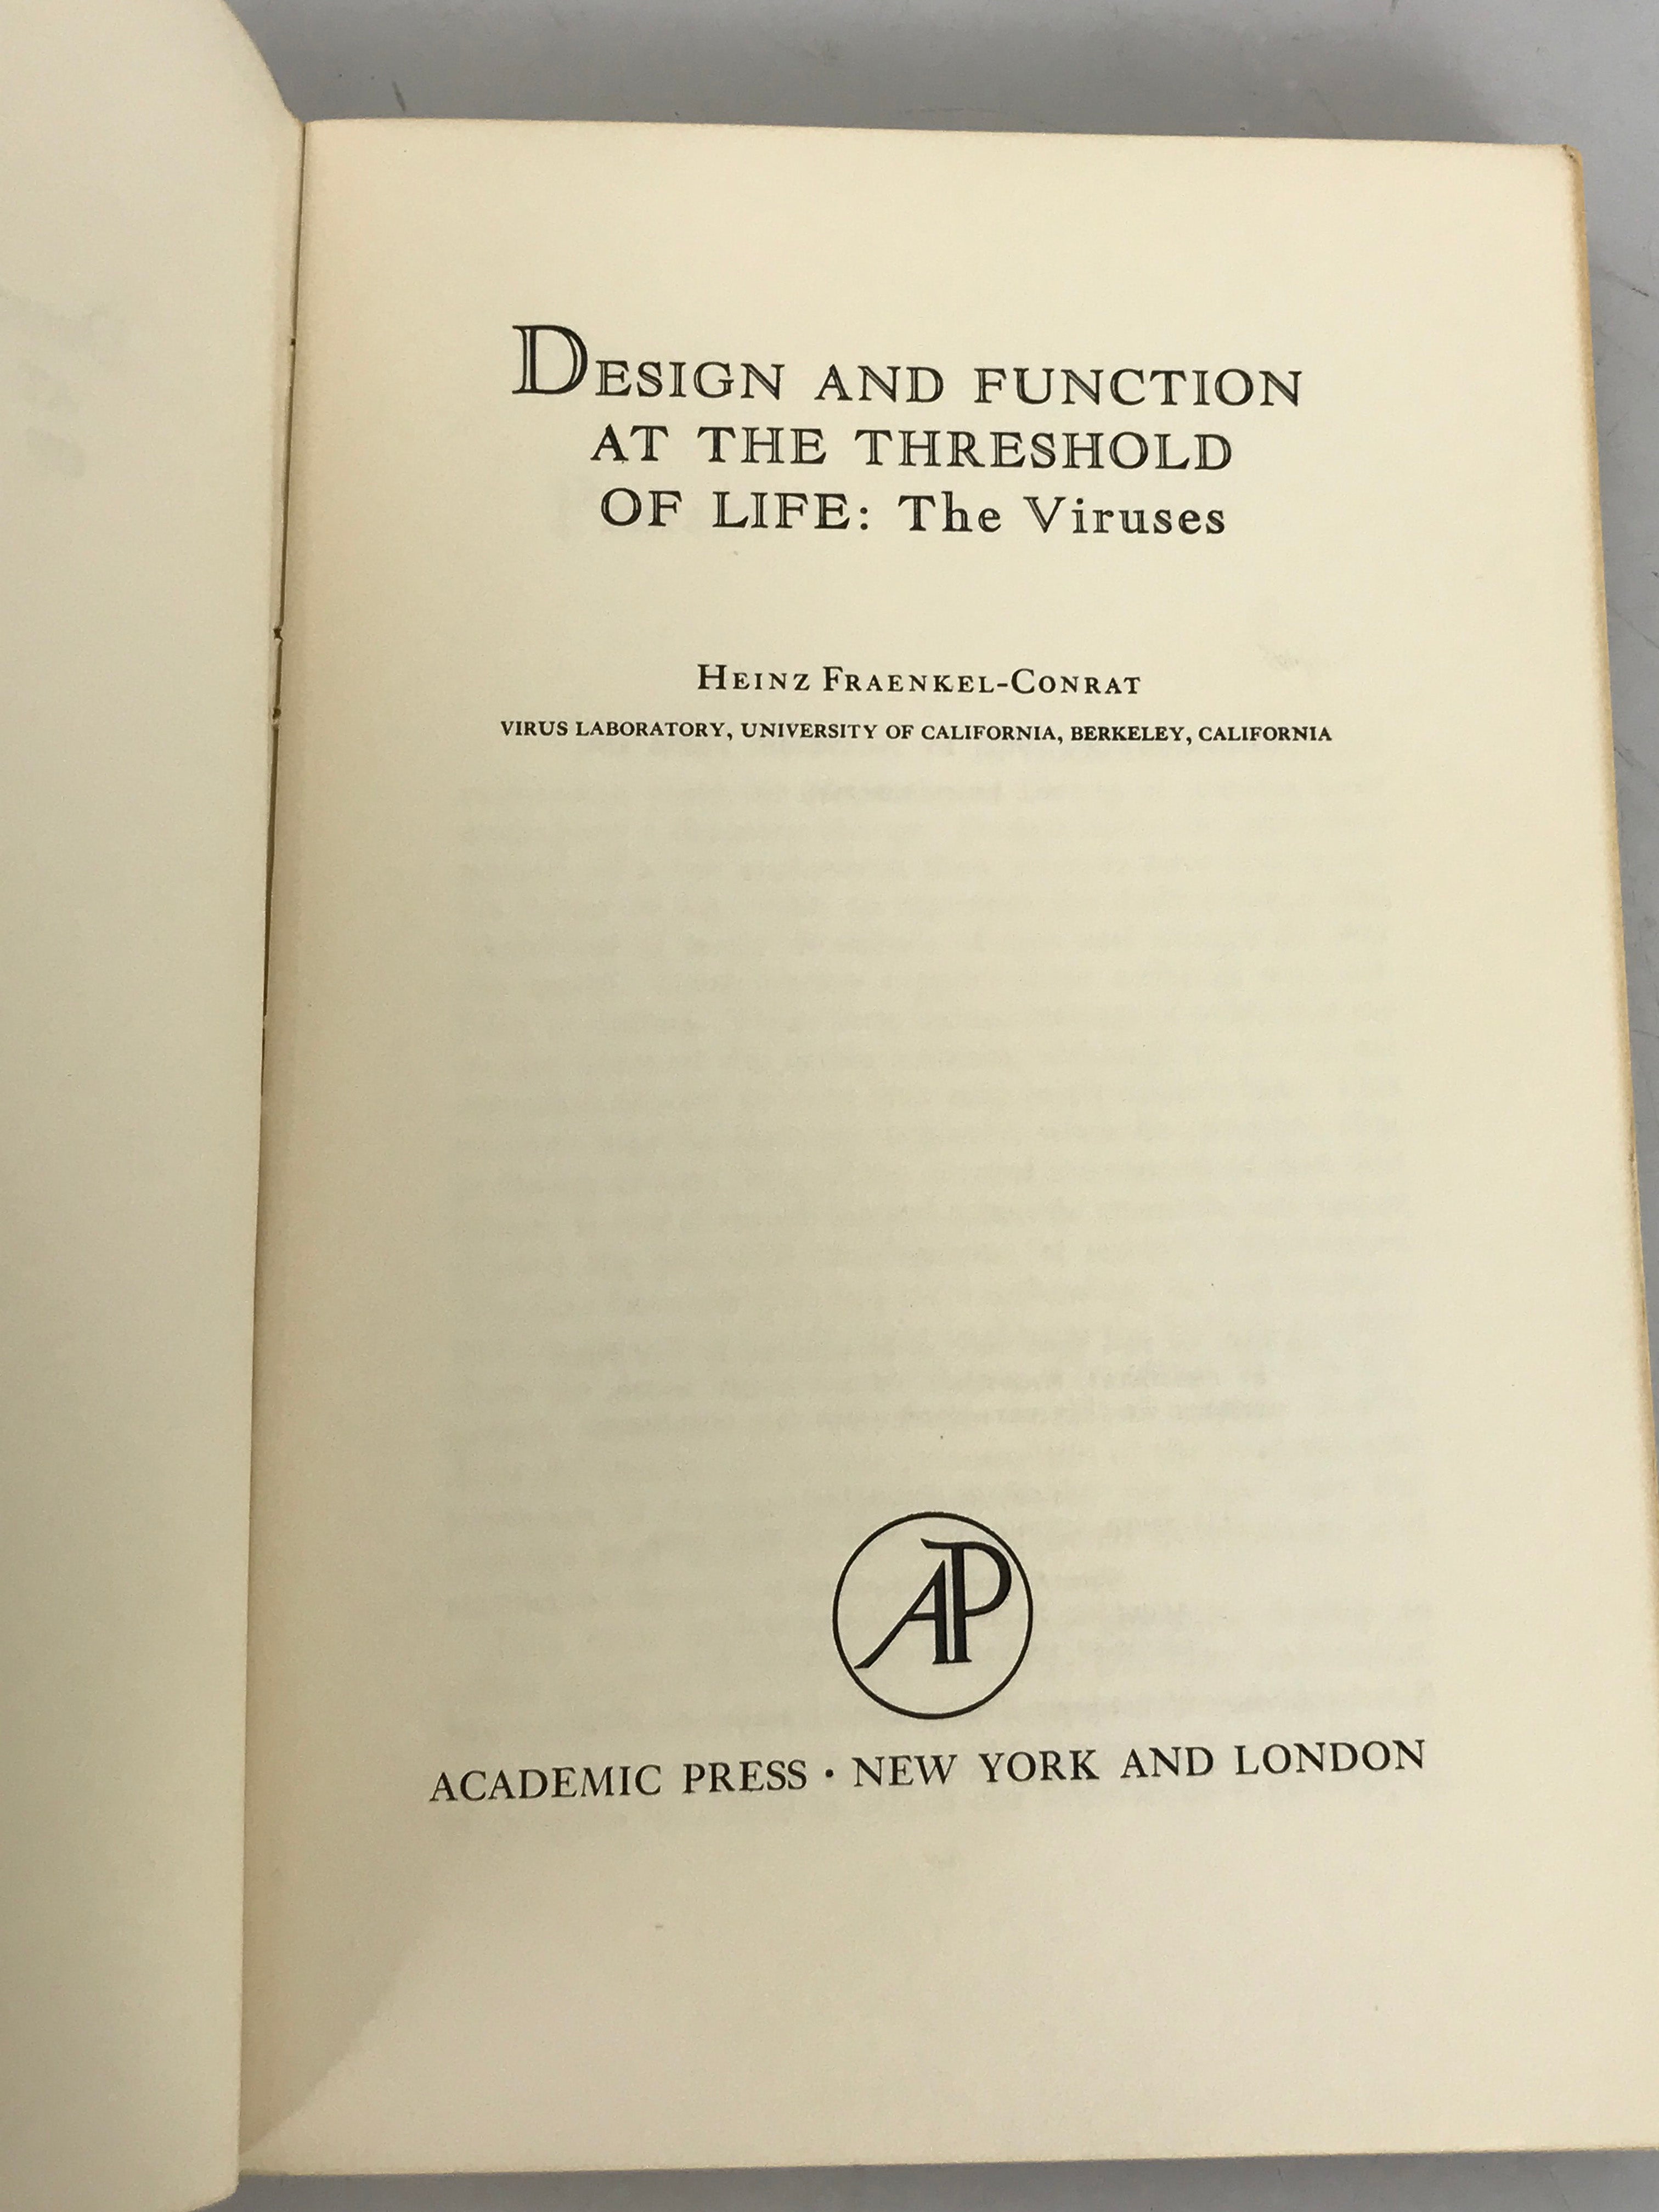 Design and Function at the Threshold of Life: by Heinz Fraenkel-Conrat 1962 SC